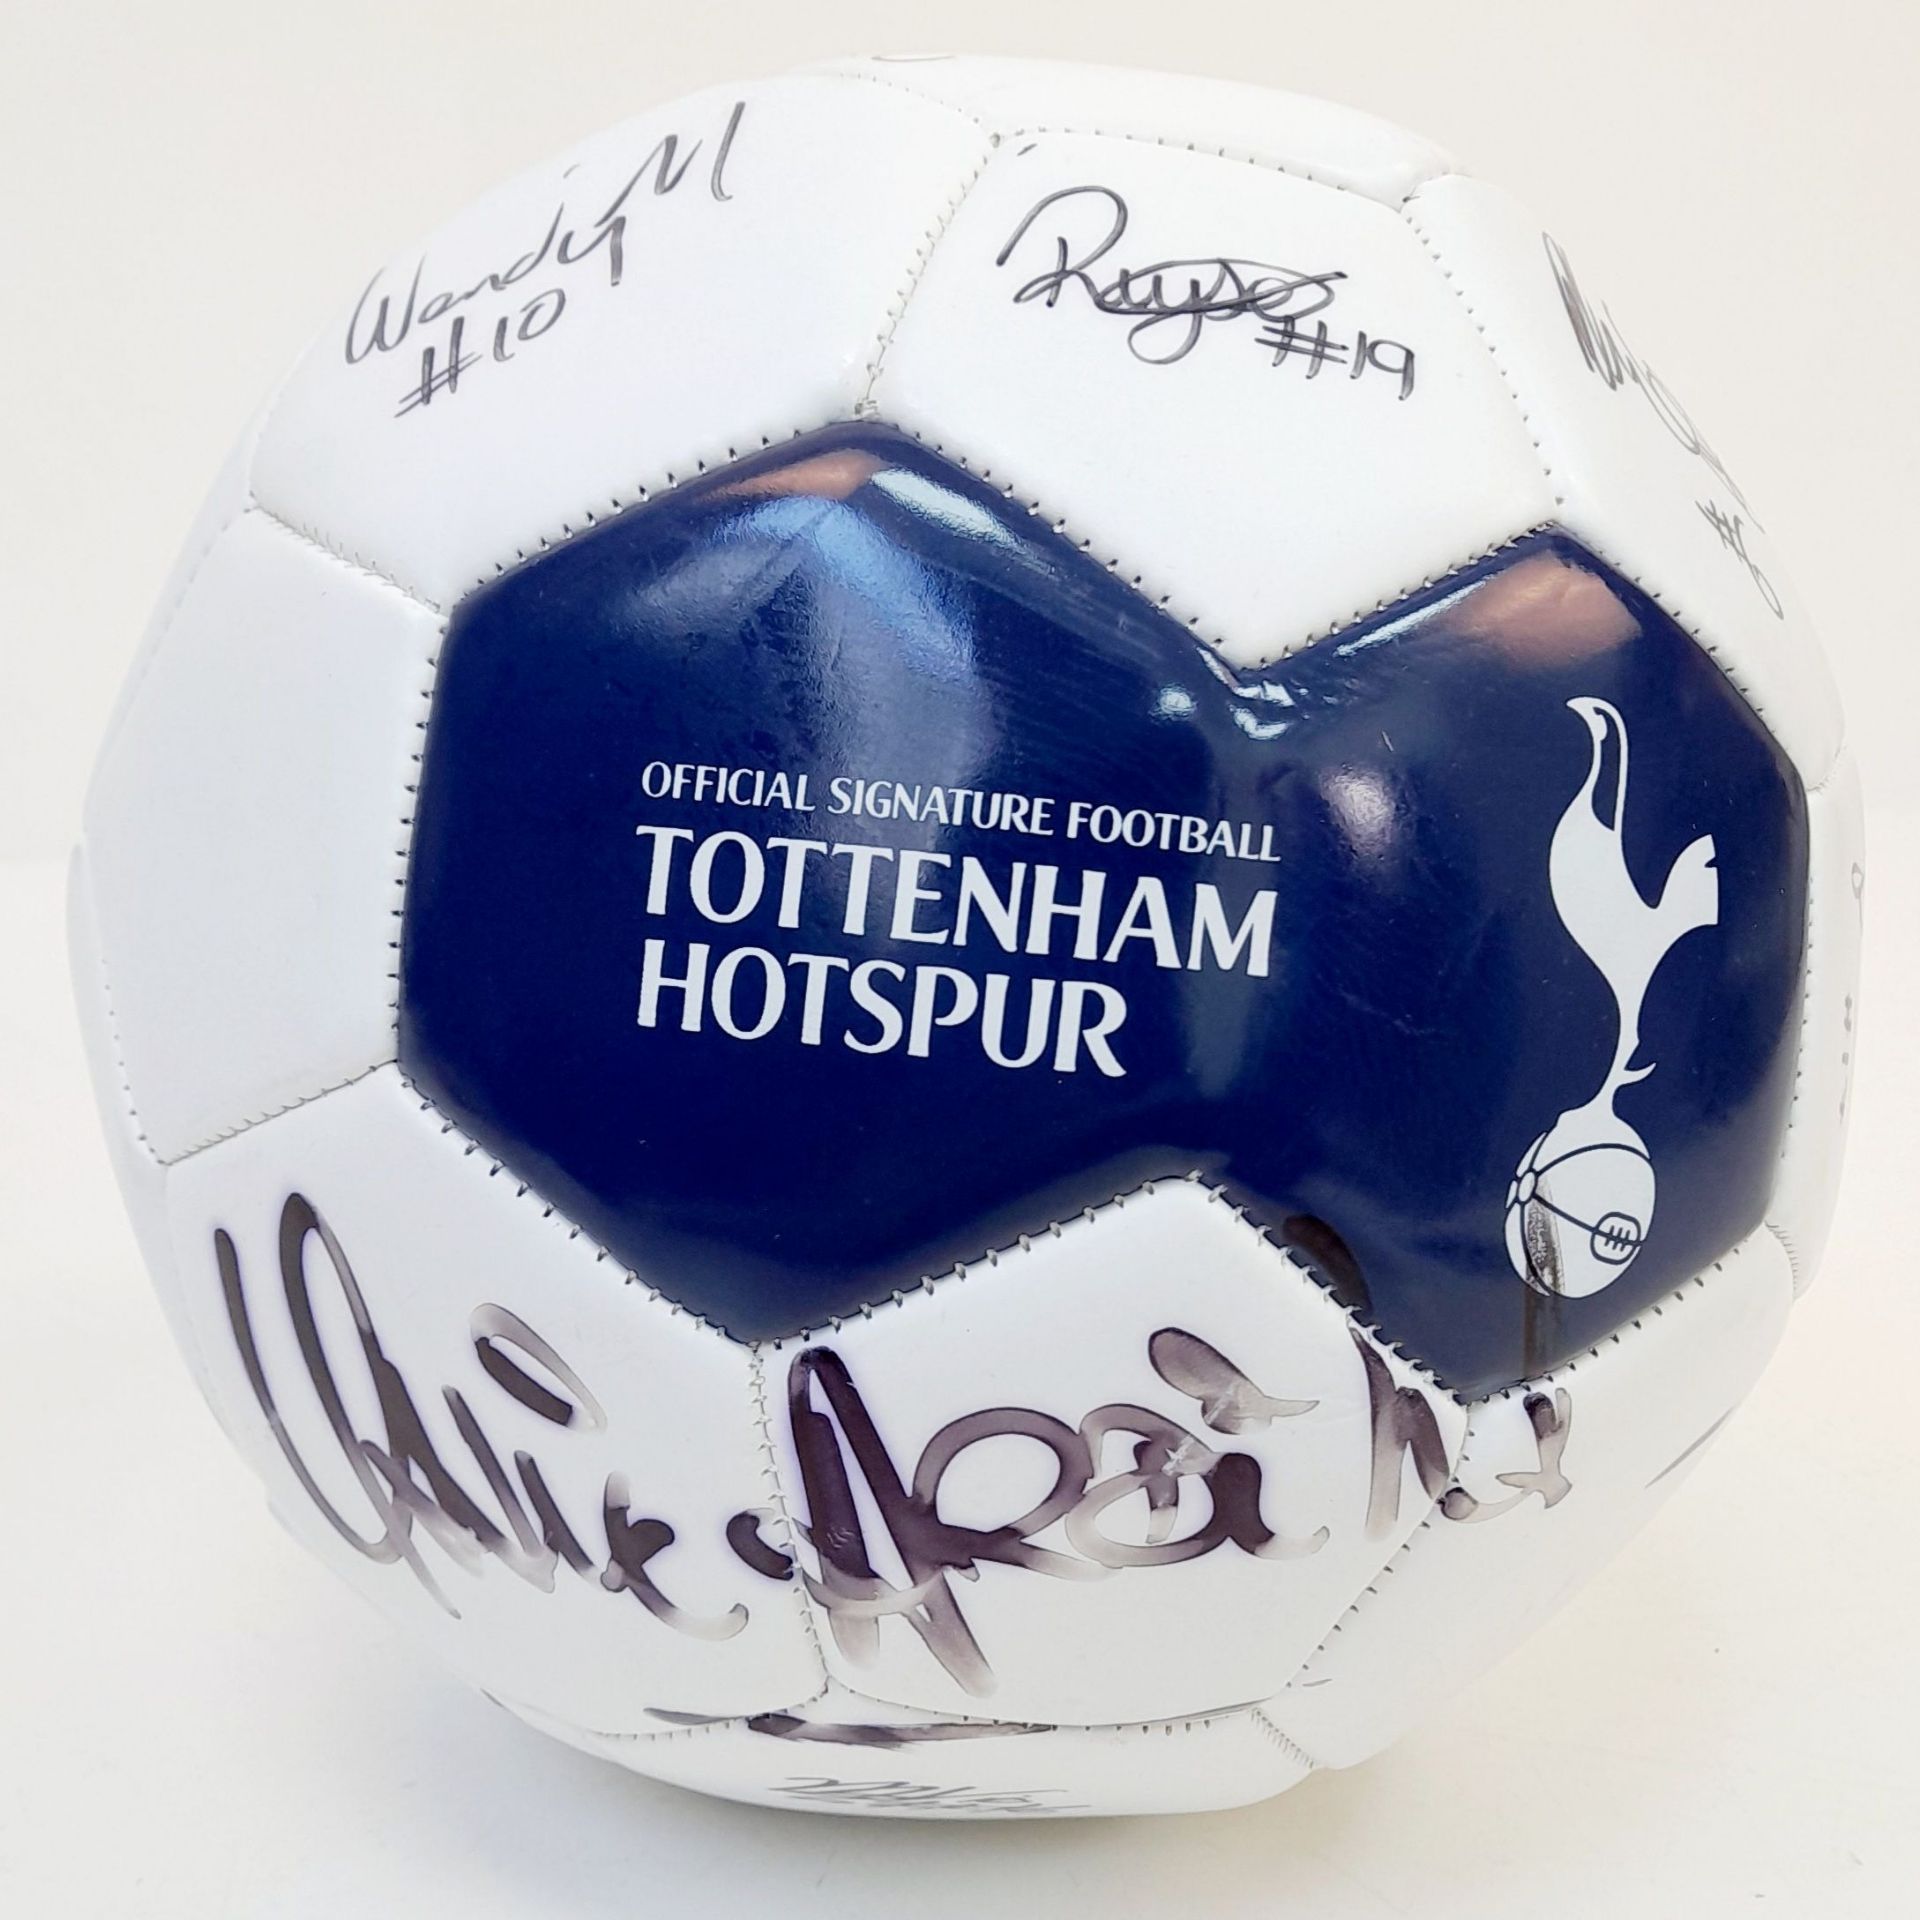 A Tottenham FC Official Signature Signed Football - Spurs Ladies!